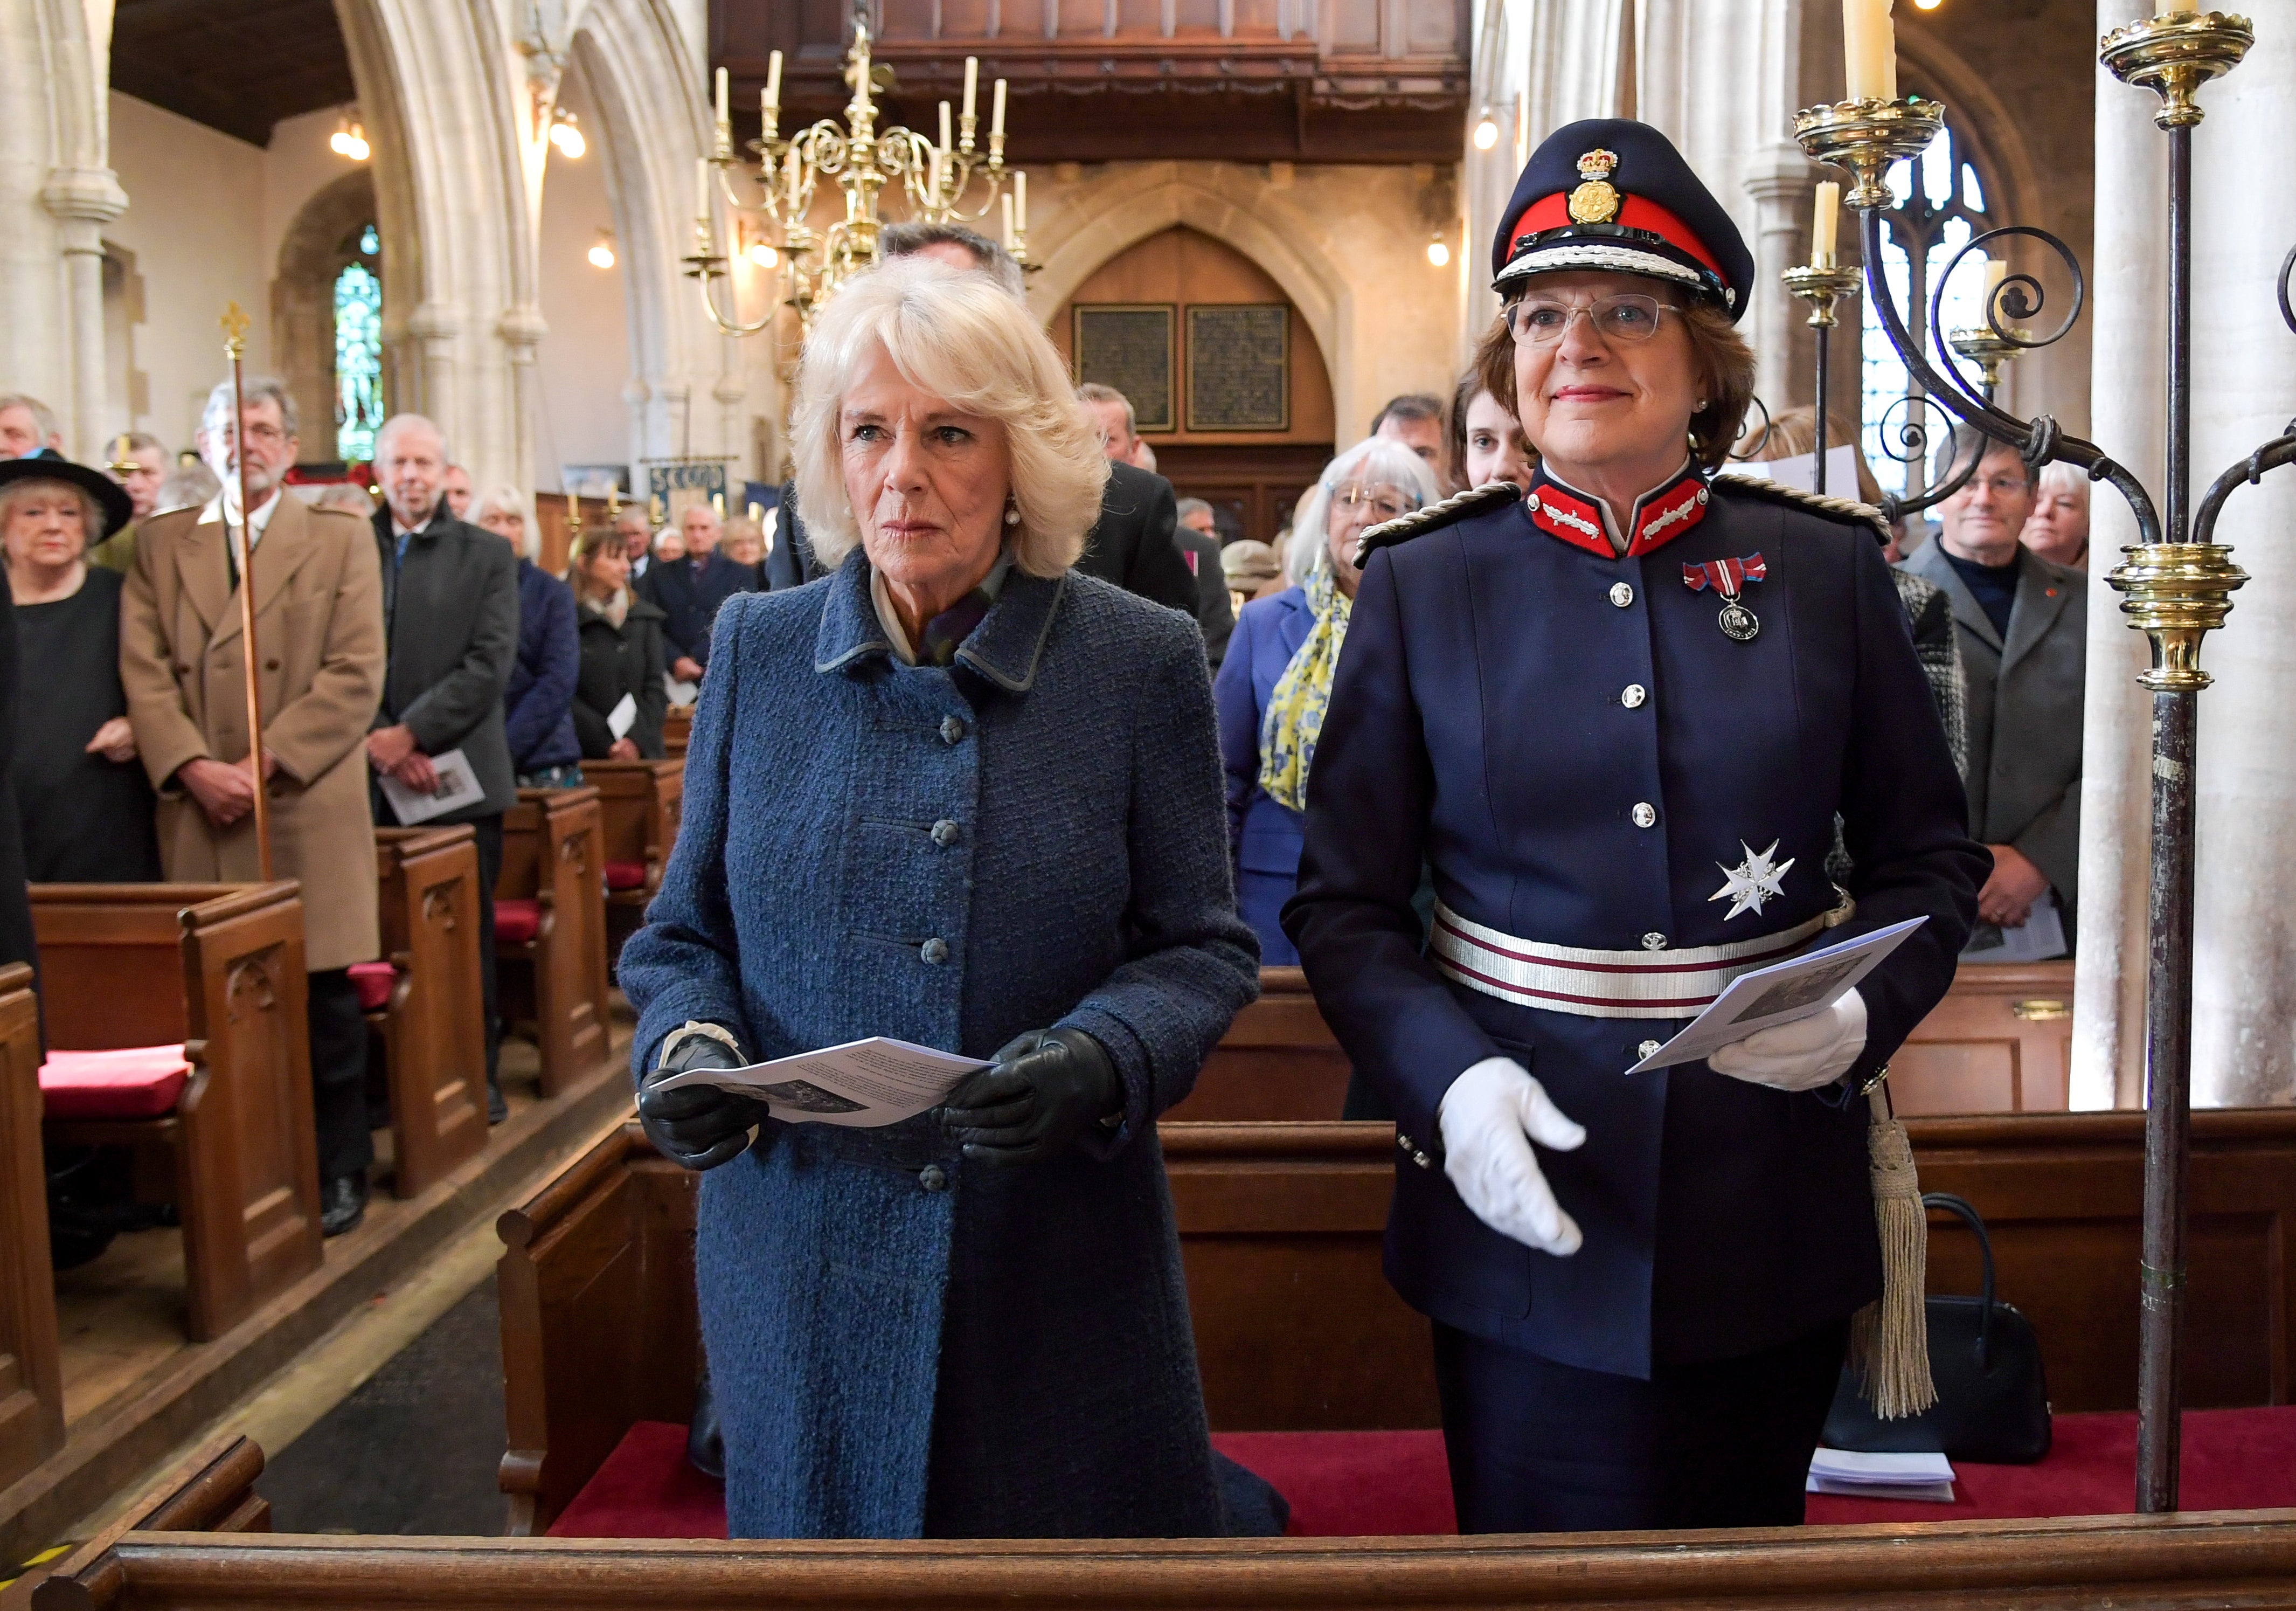 Camilla, Duchess of Cornwall and Lord-Lieutenant of Wilshire, Mrs Sarah Troughton attend a church service during a visit to Wiltshire on December 02, 2021